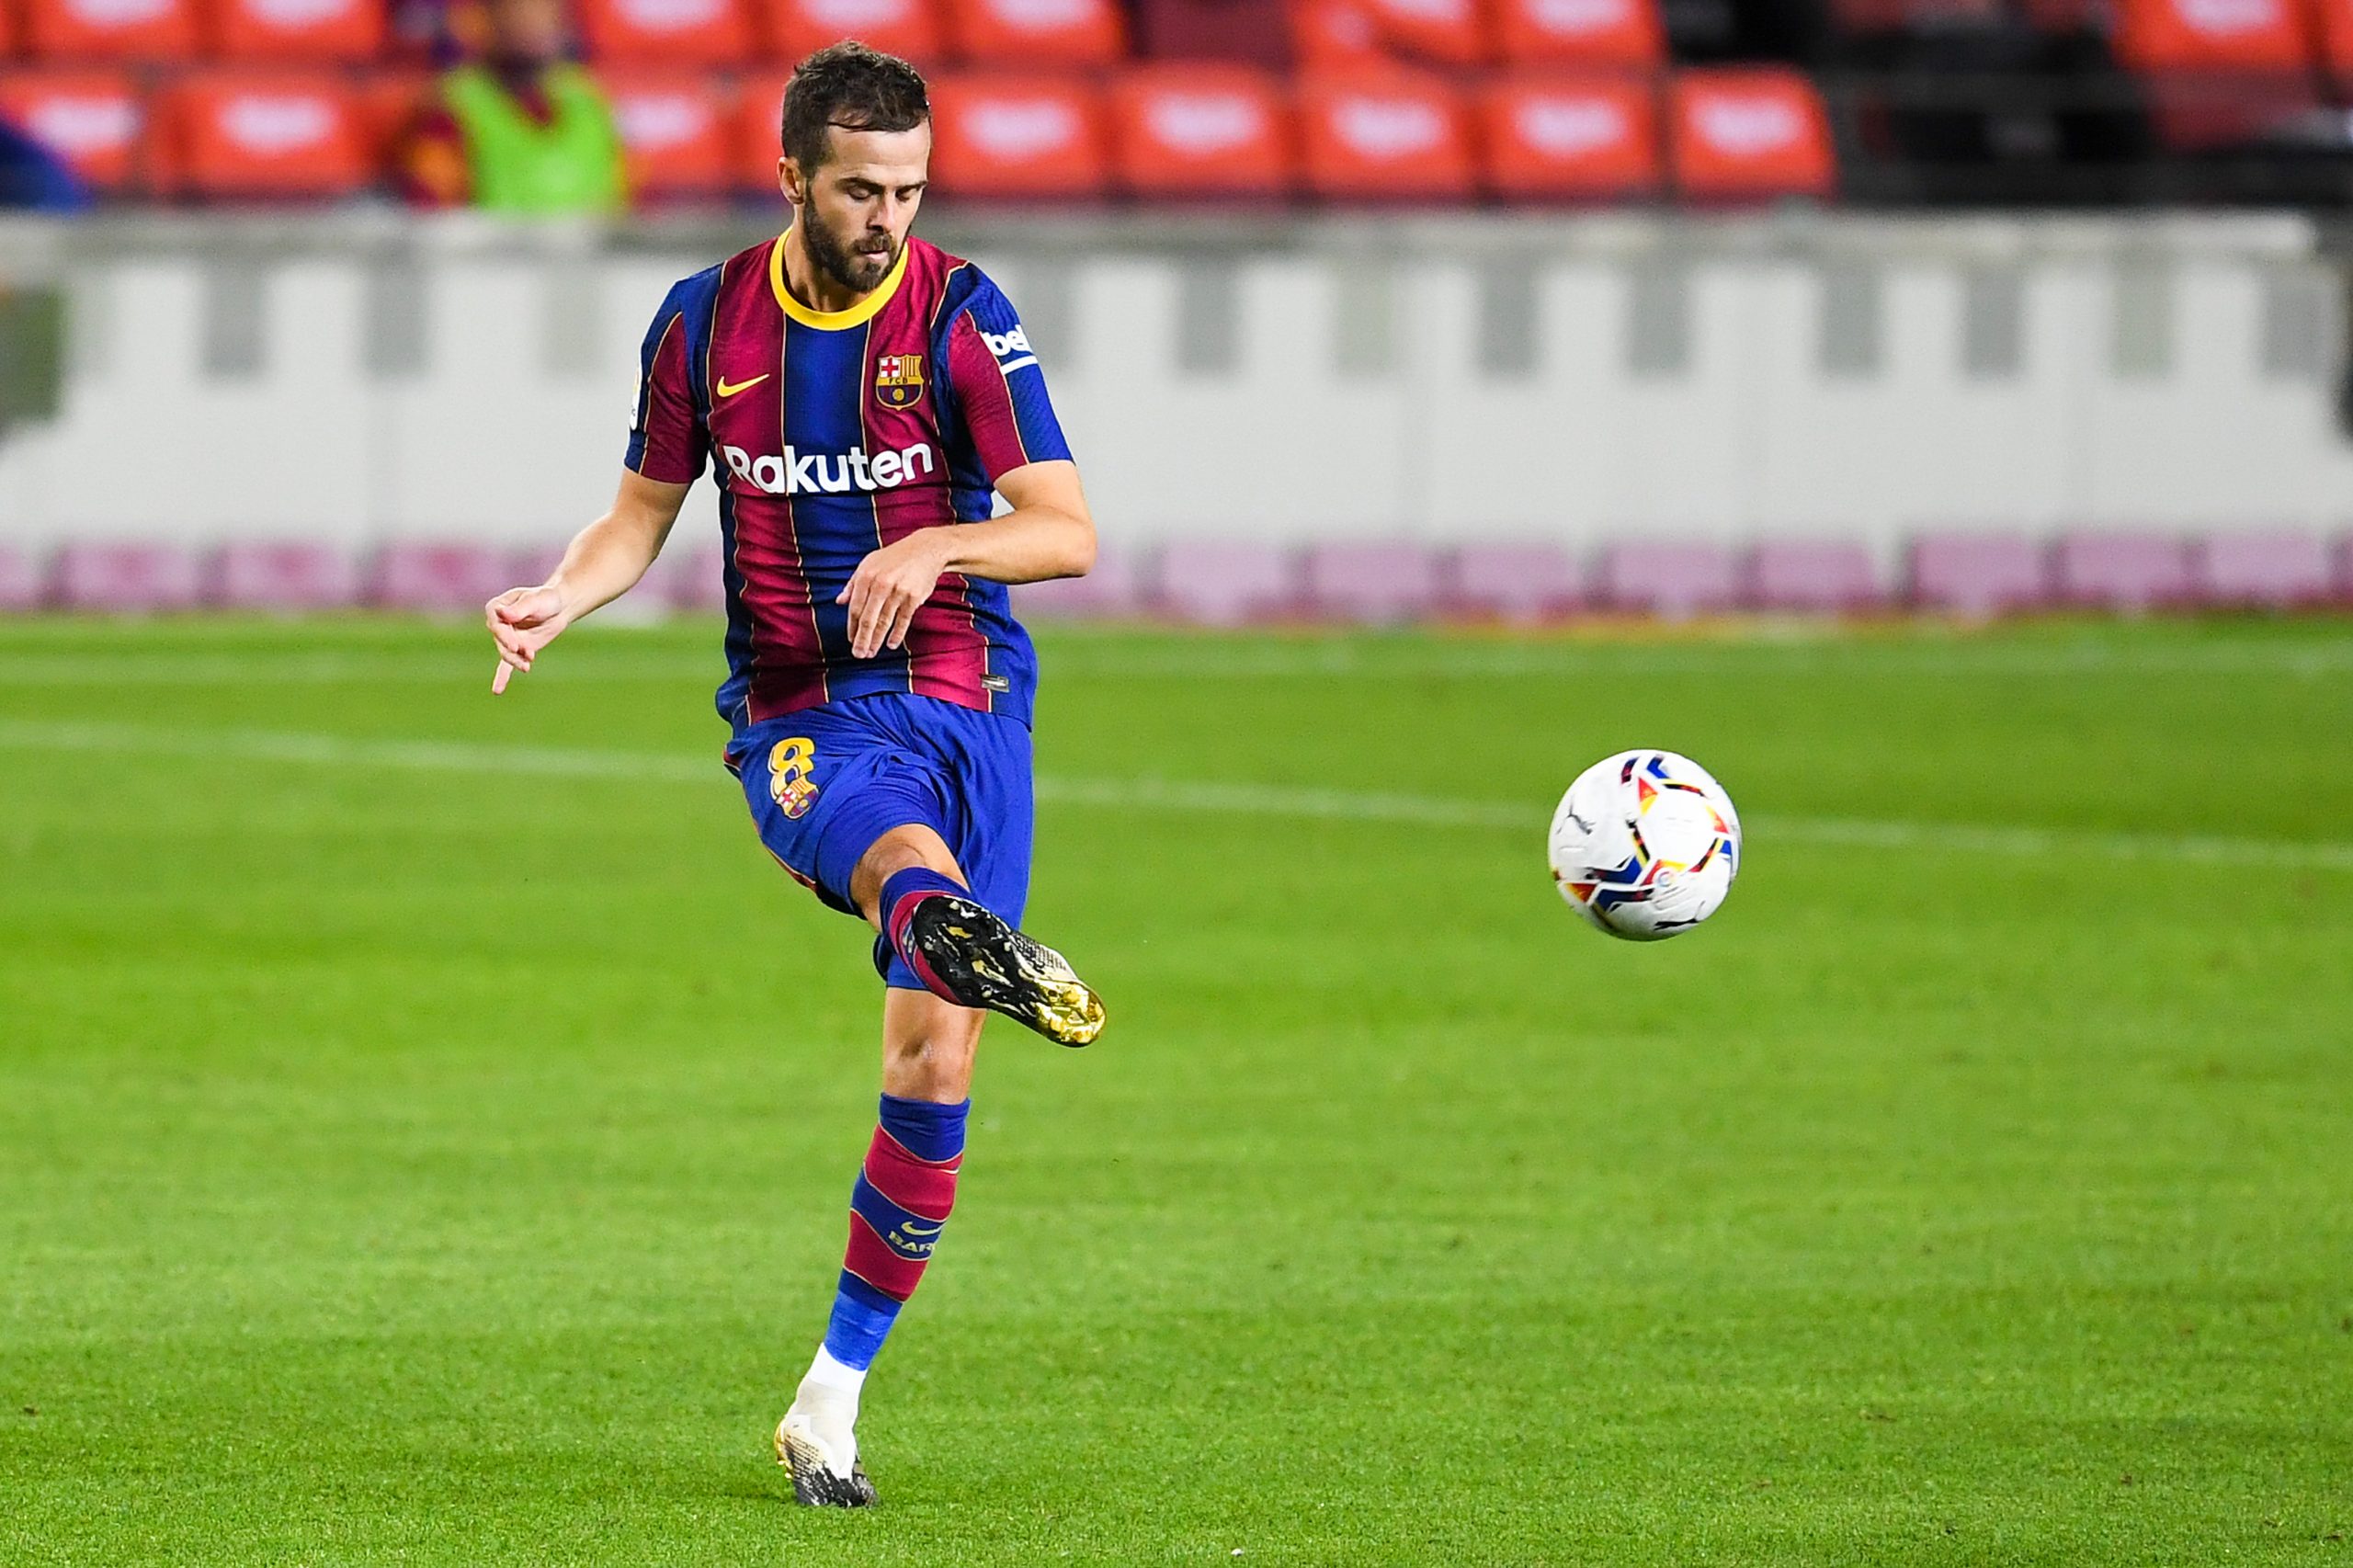 Everton register their interest in Barcelona's Pjanic who is seen in the picture